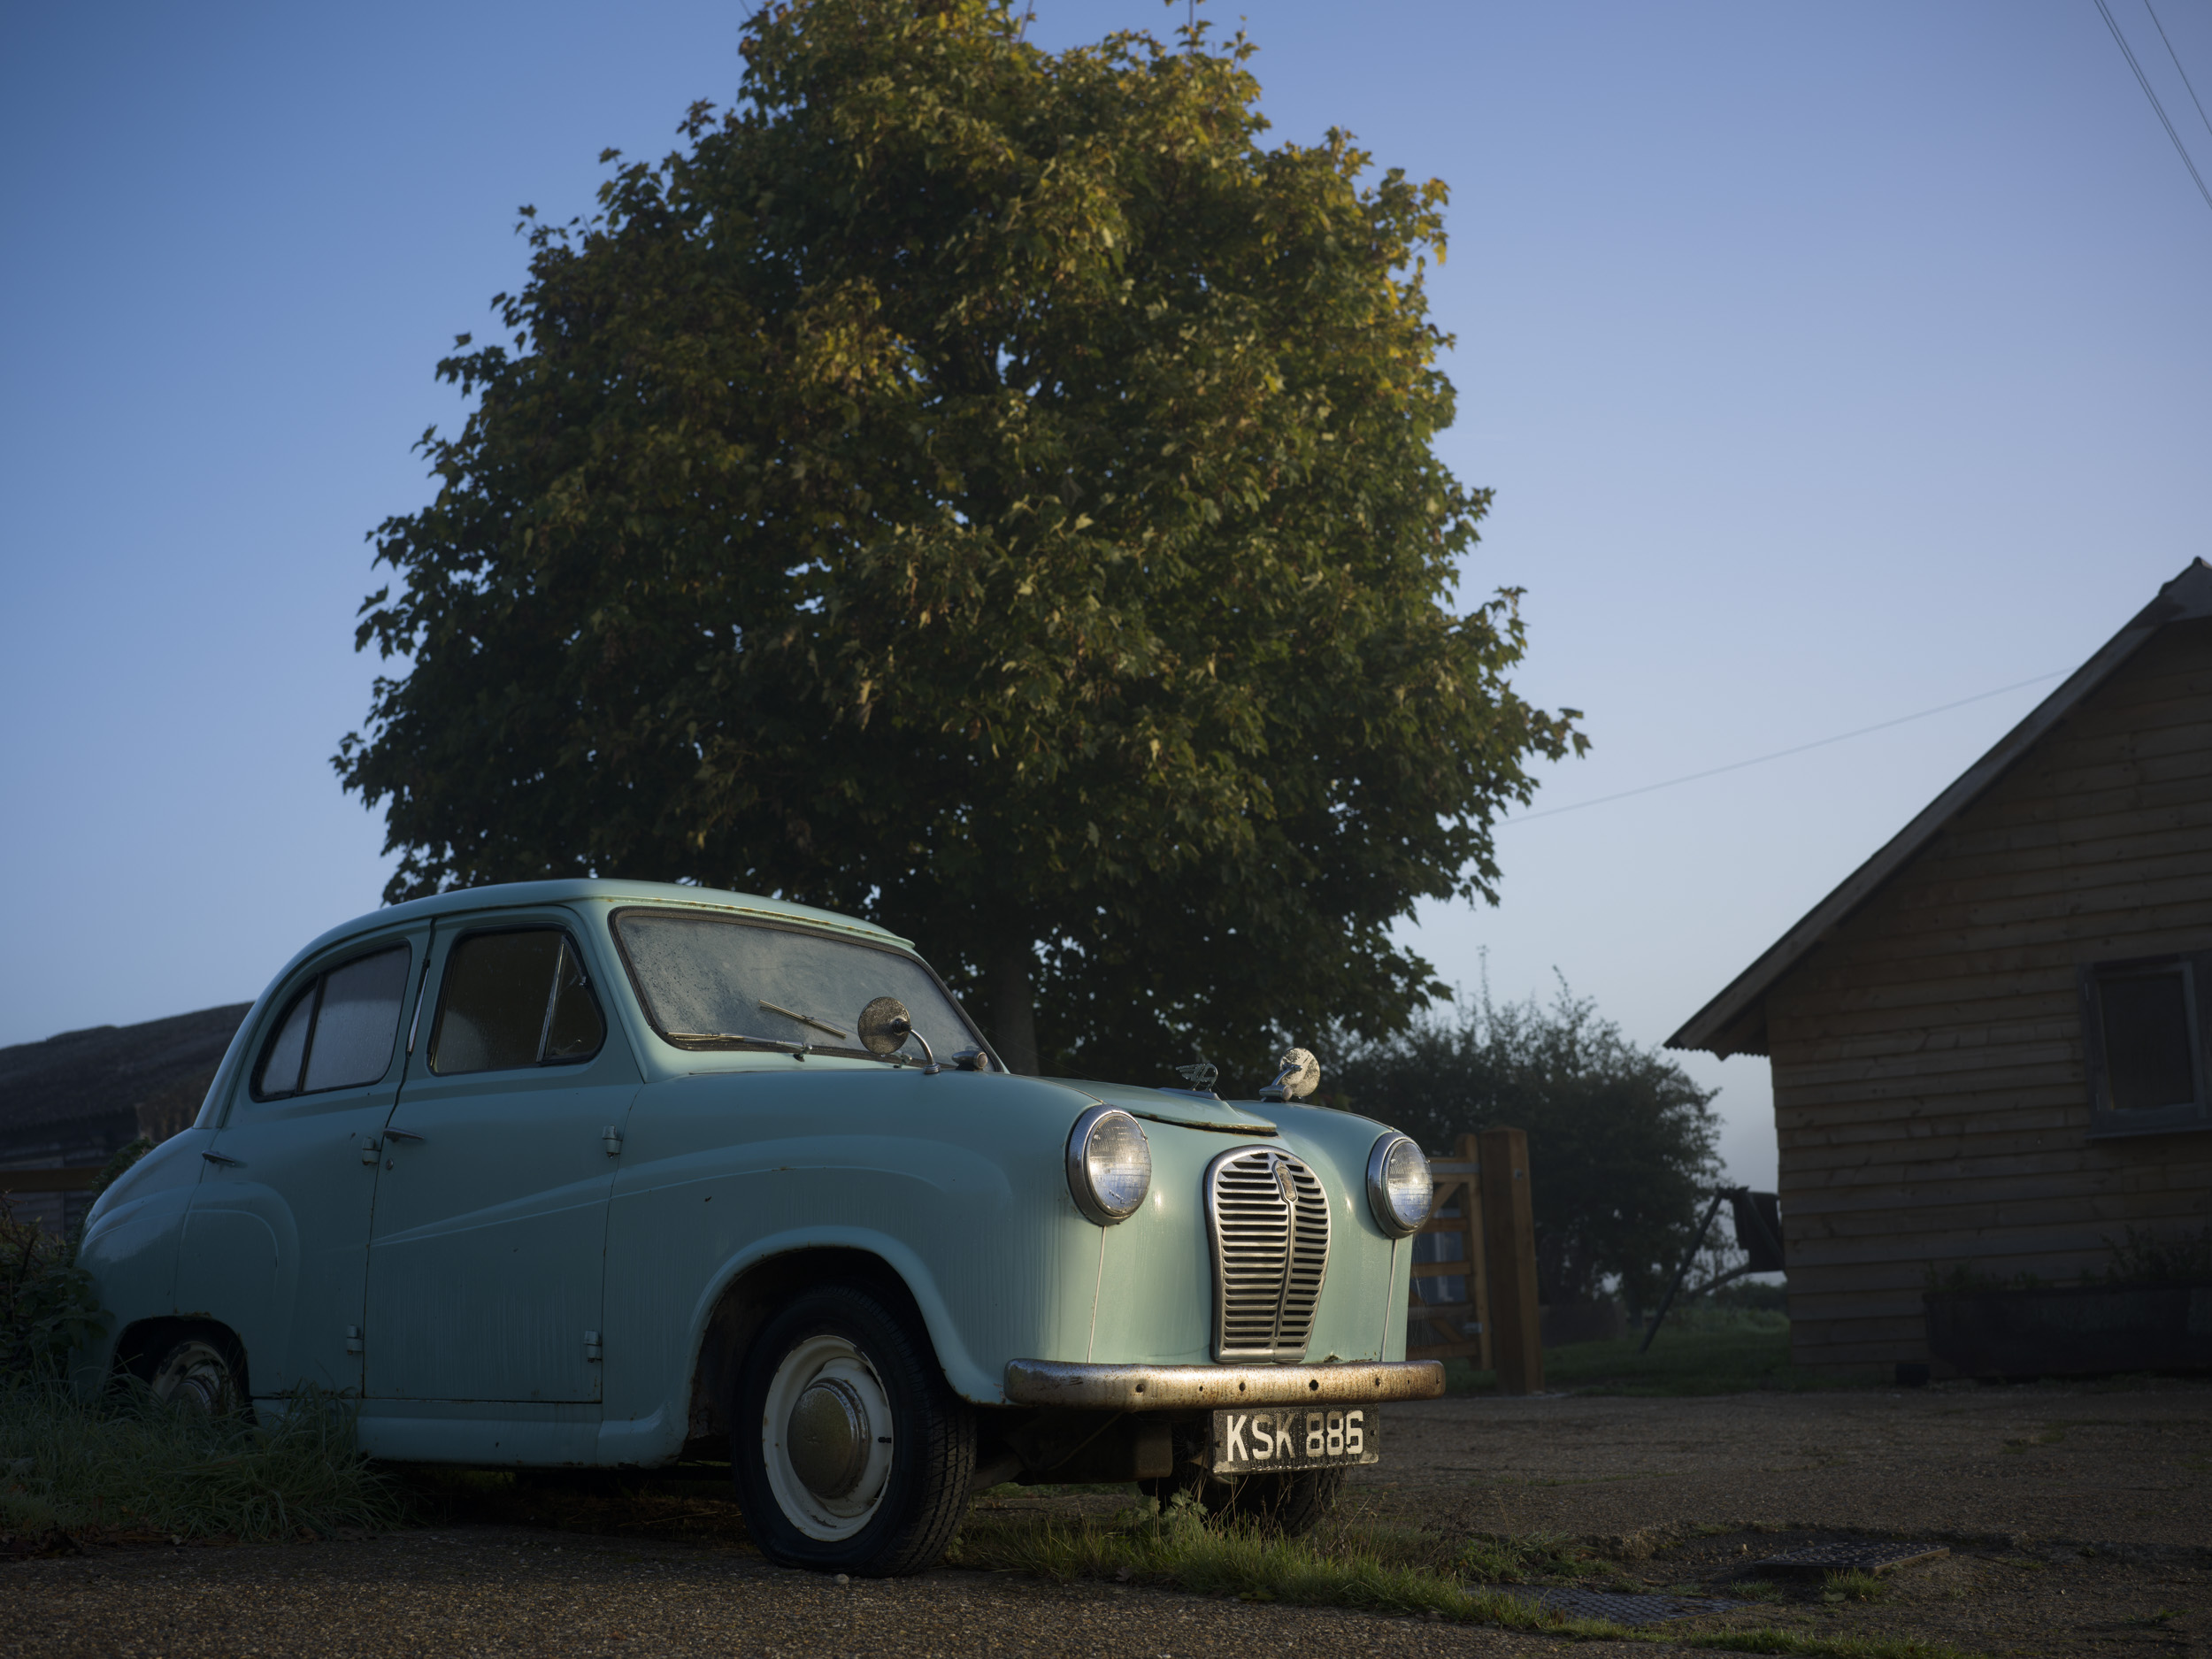 Sample image taken with the Hasselblad X2D 100C of a classic car in morning light